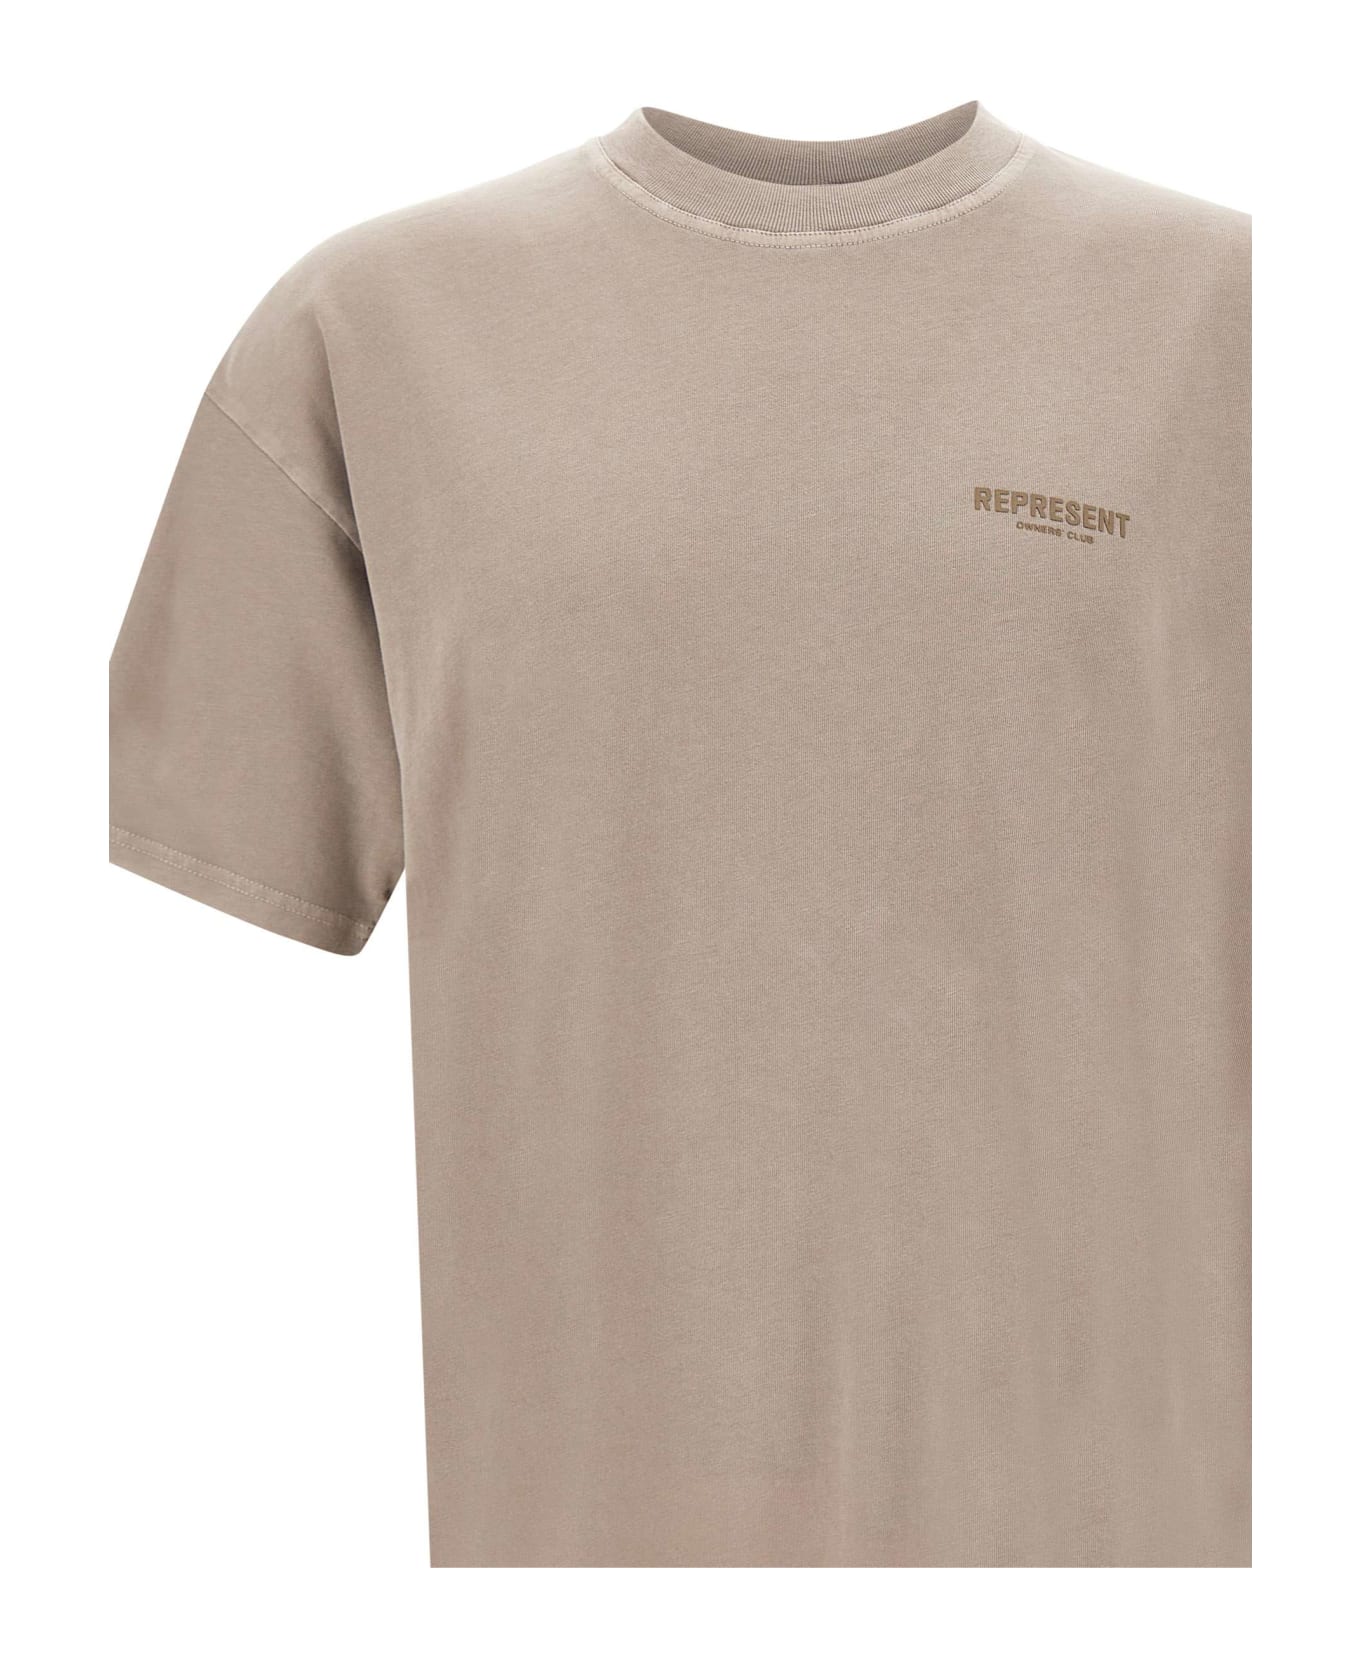 REPRESENT "owners Club" Cotton T-shirt - BEIGE